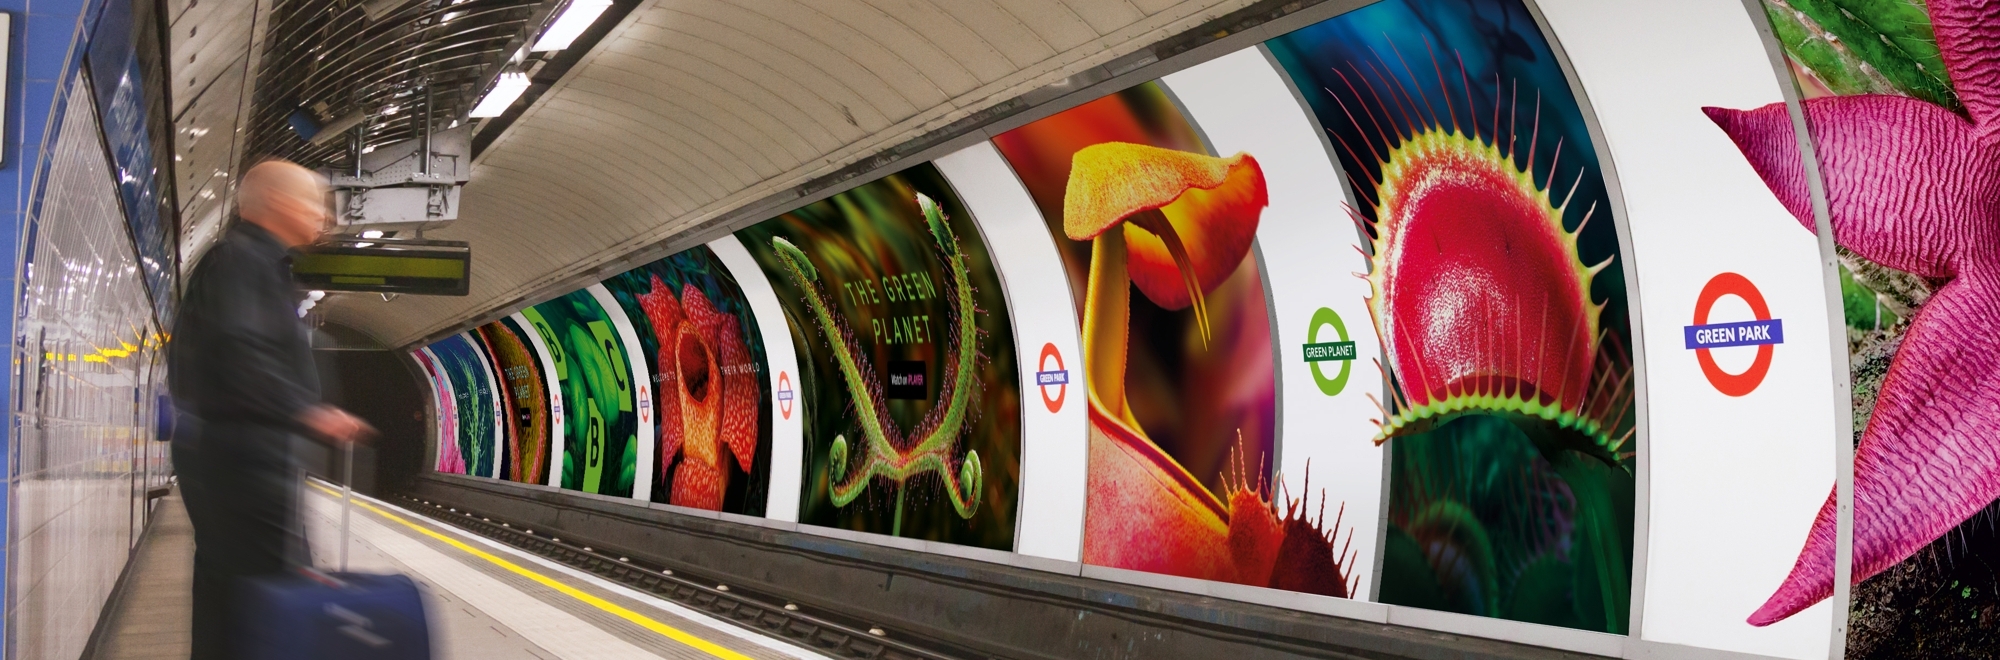 The Green Planet takes over Green Park Tube station to launch Sir David Attenborough’s new landmark series